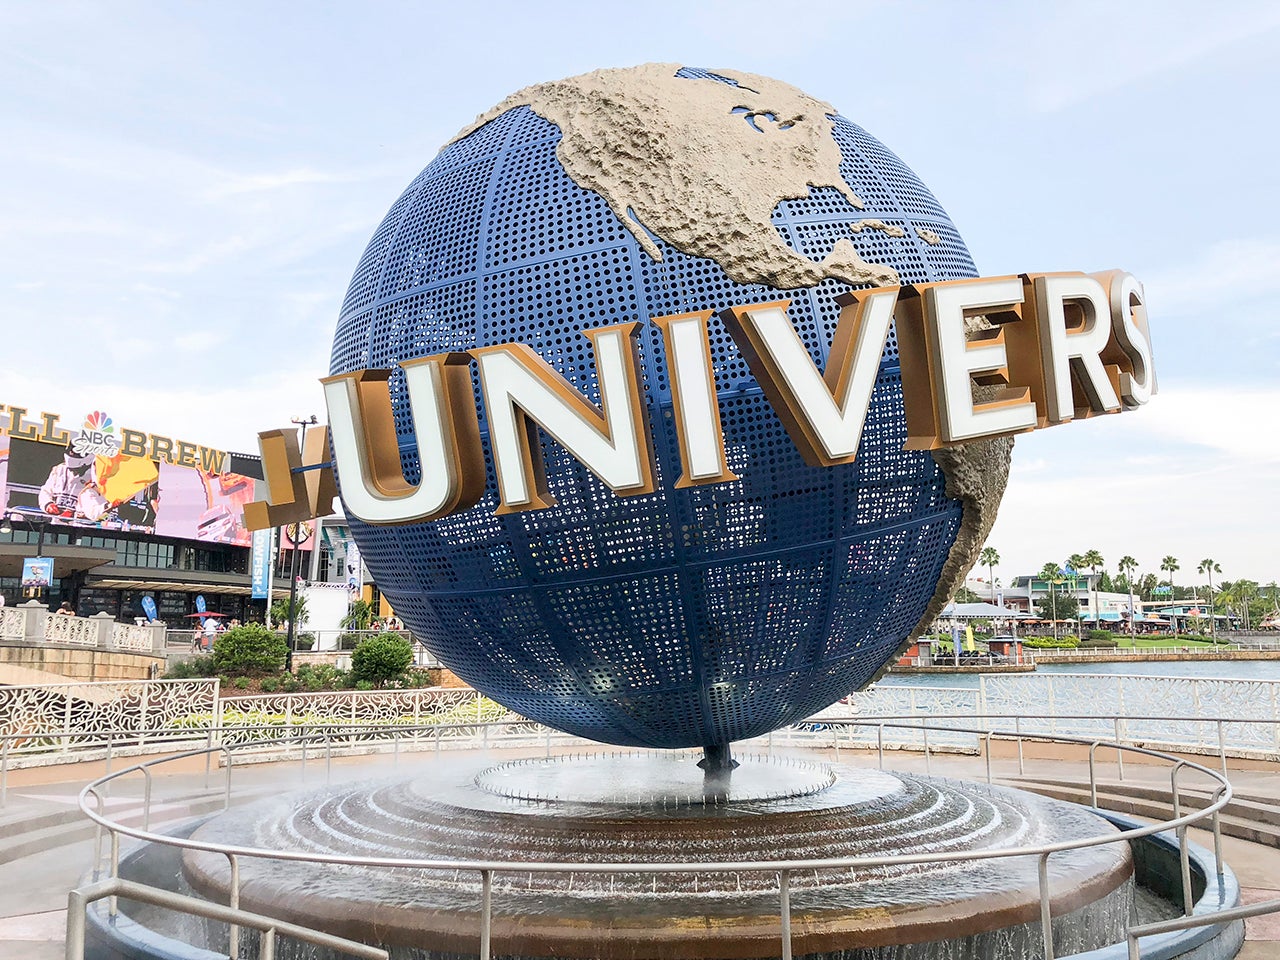 Universal Orlando changes how it prices park tickets, temporarily closes 2 hotels